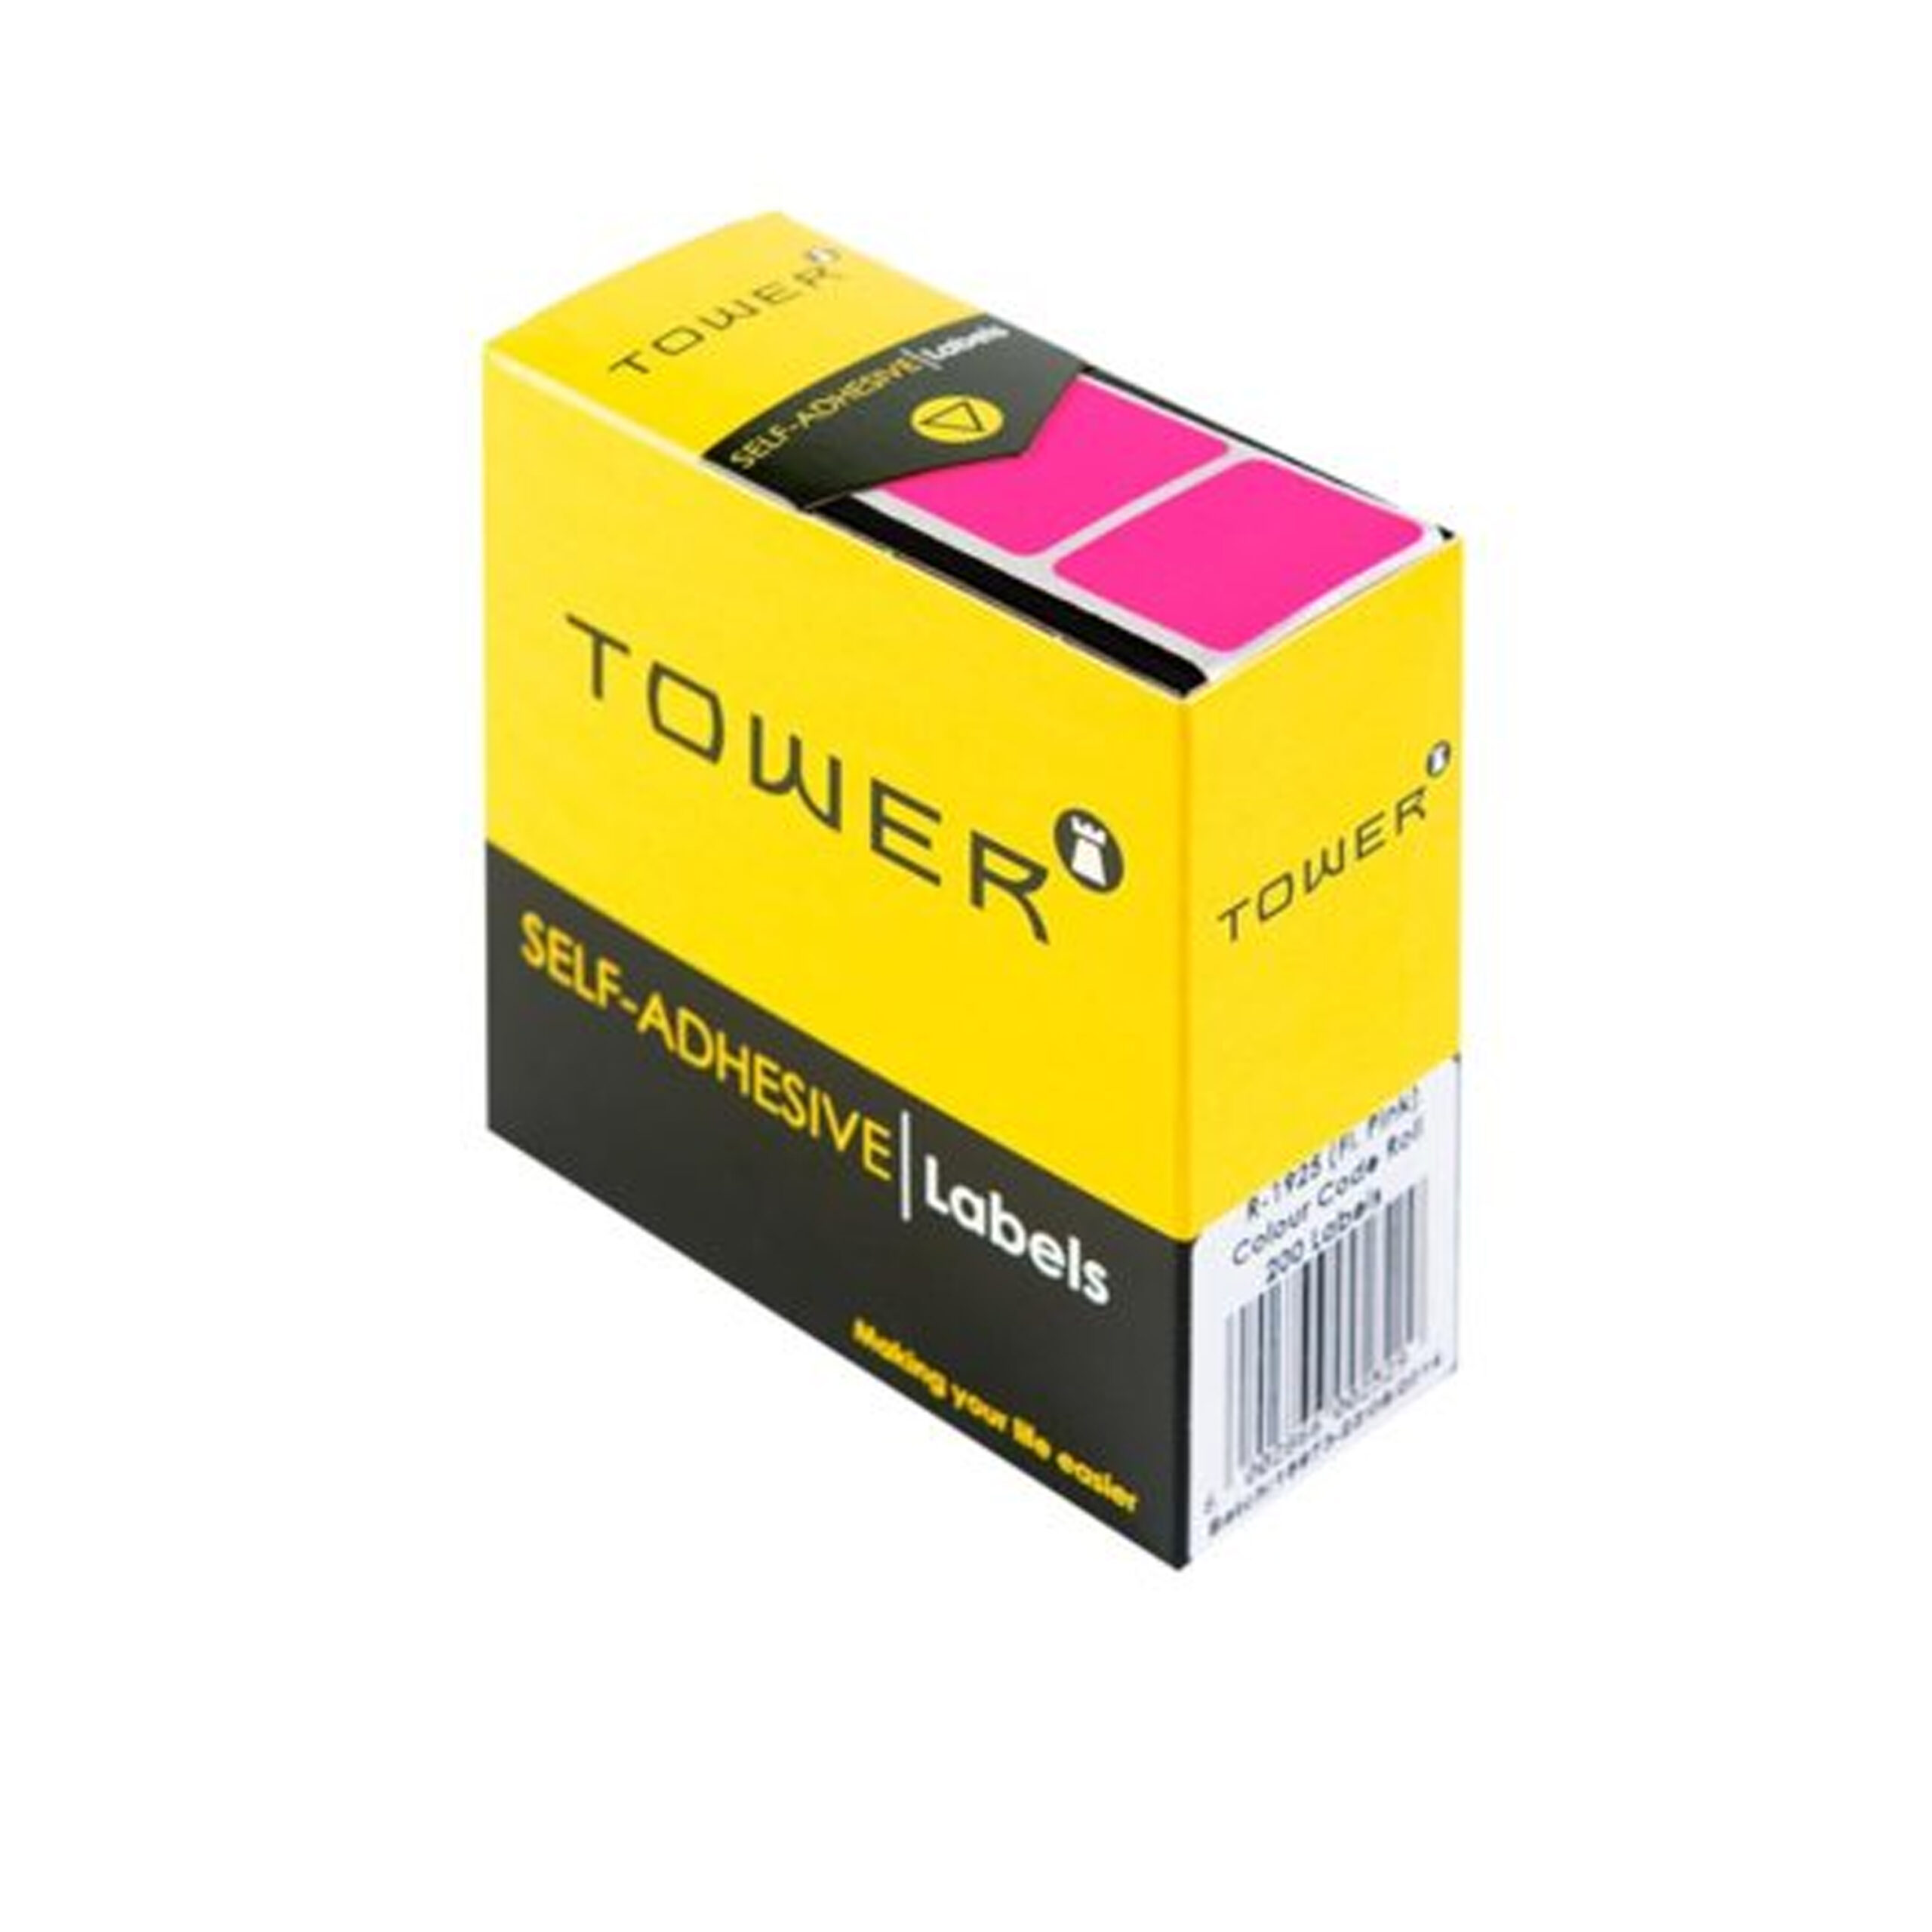 TOWER  SELF
ADHESIVE FLU.
PINK LABELS 
19x25mm (200
LABELS)